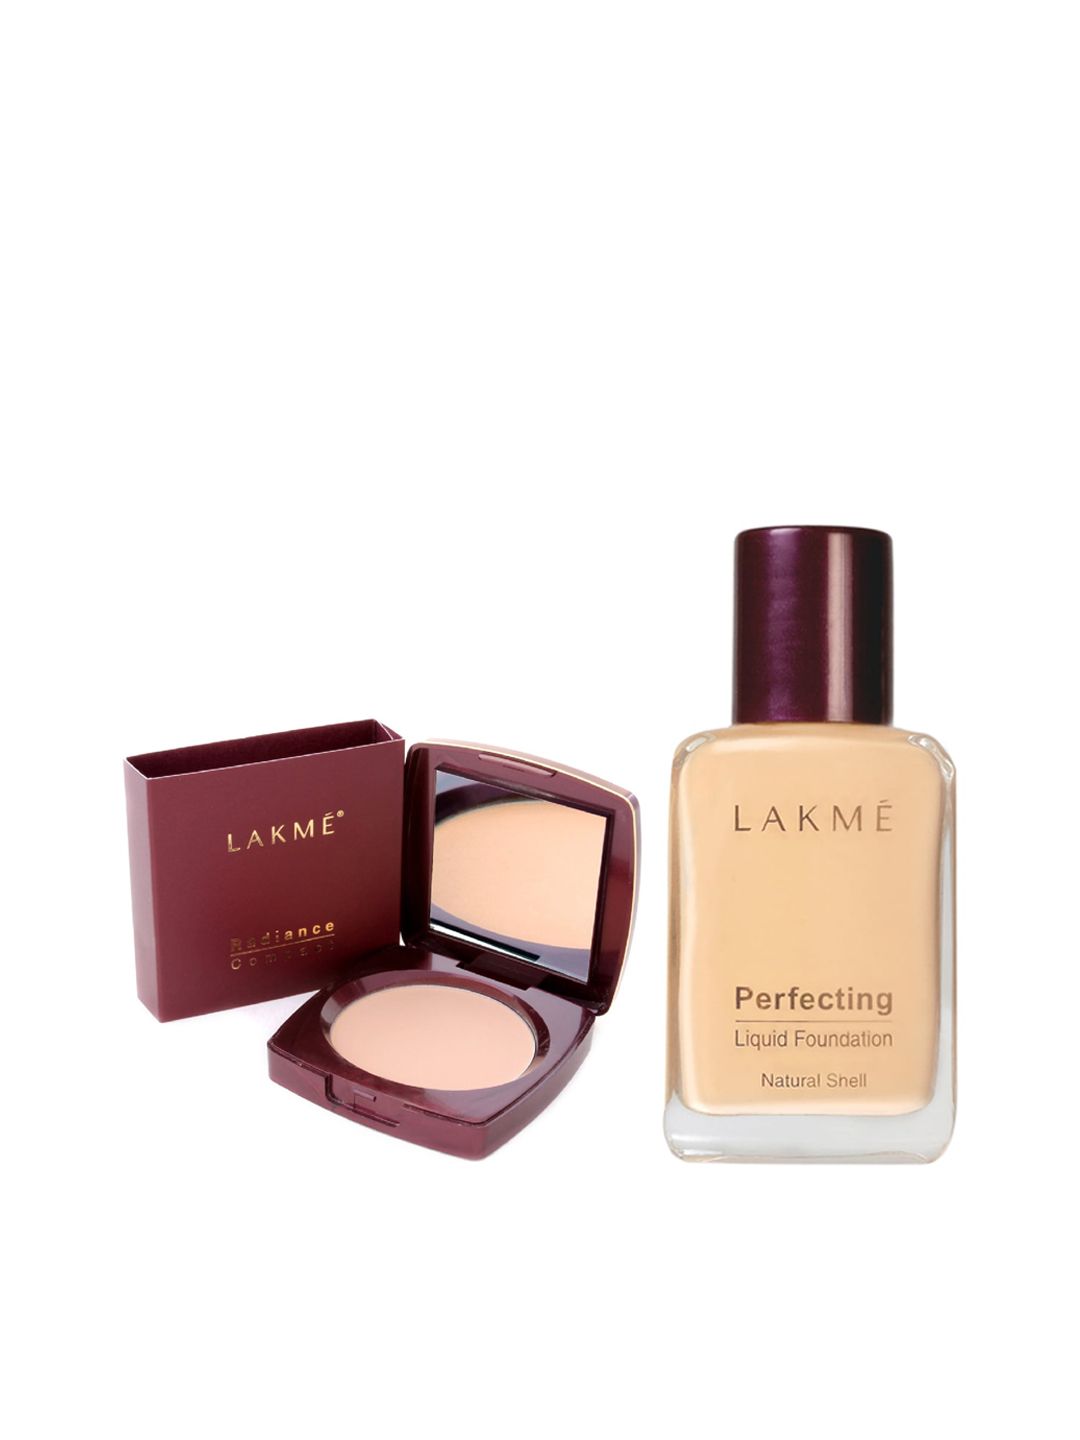 Lakme Set of Perfecting Liquid Foundation & Radiance Complexion Compact Price in India